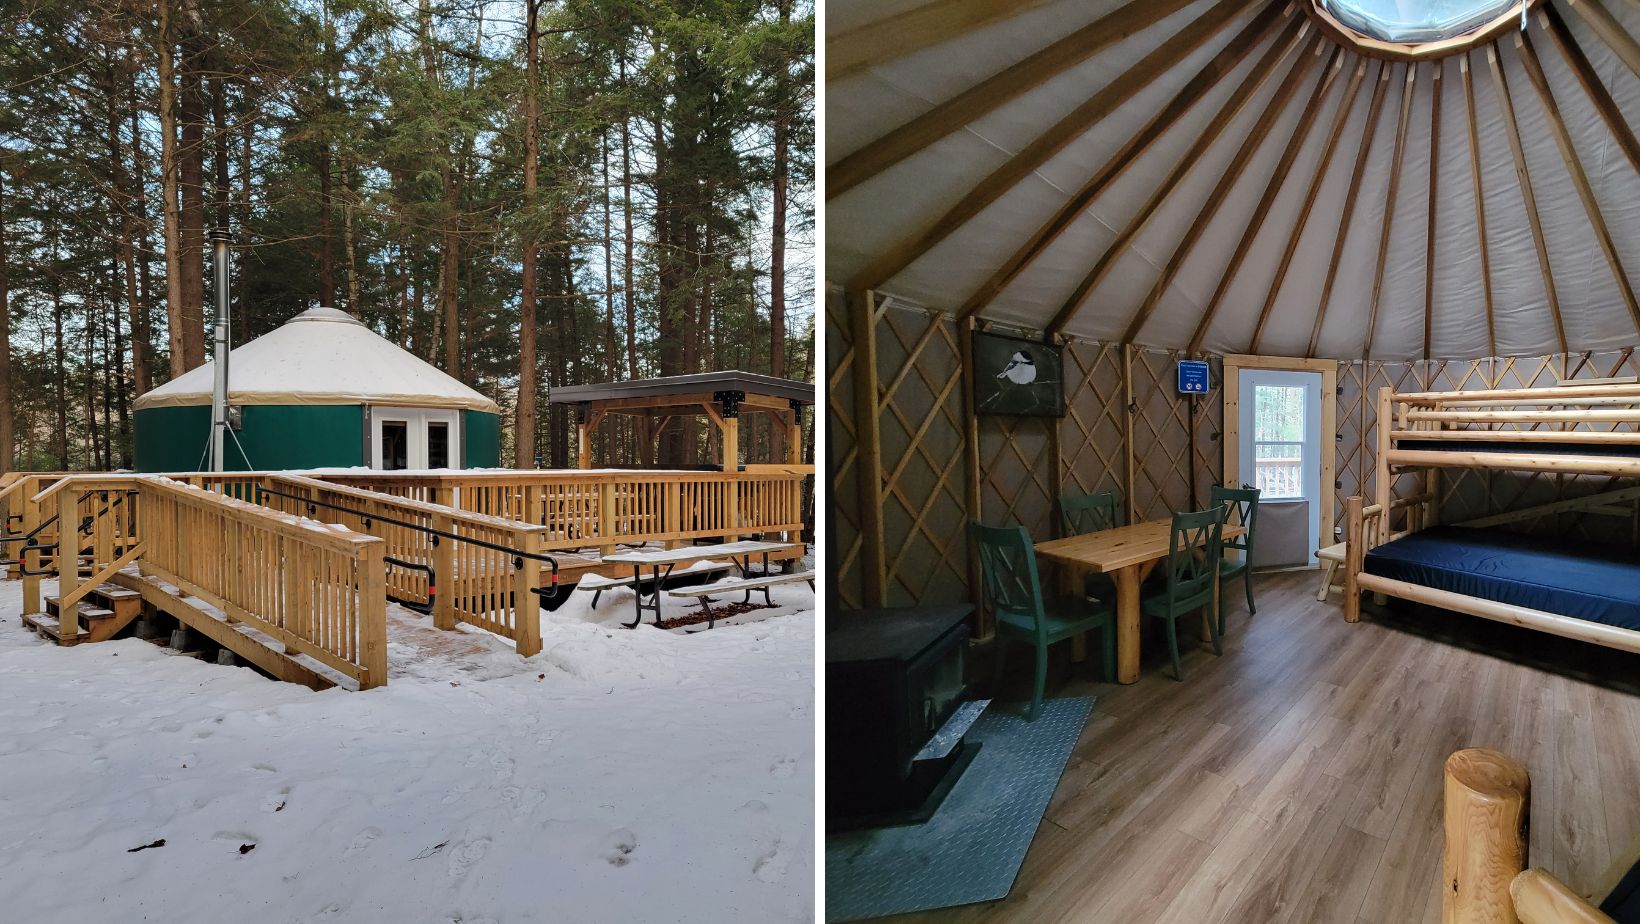 collage of exterior of yurt surrounded by snow, interior of yurt with stove, bunk beds, framed image of a chickadee on wall